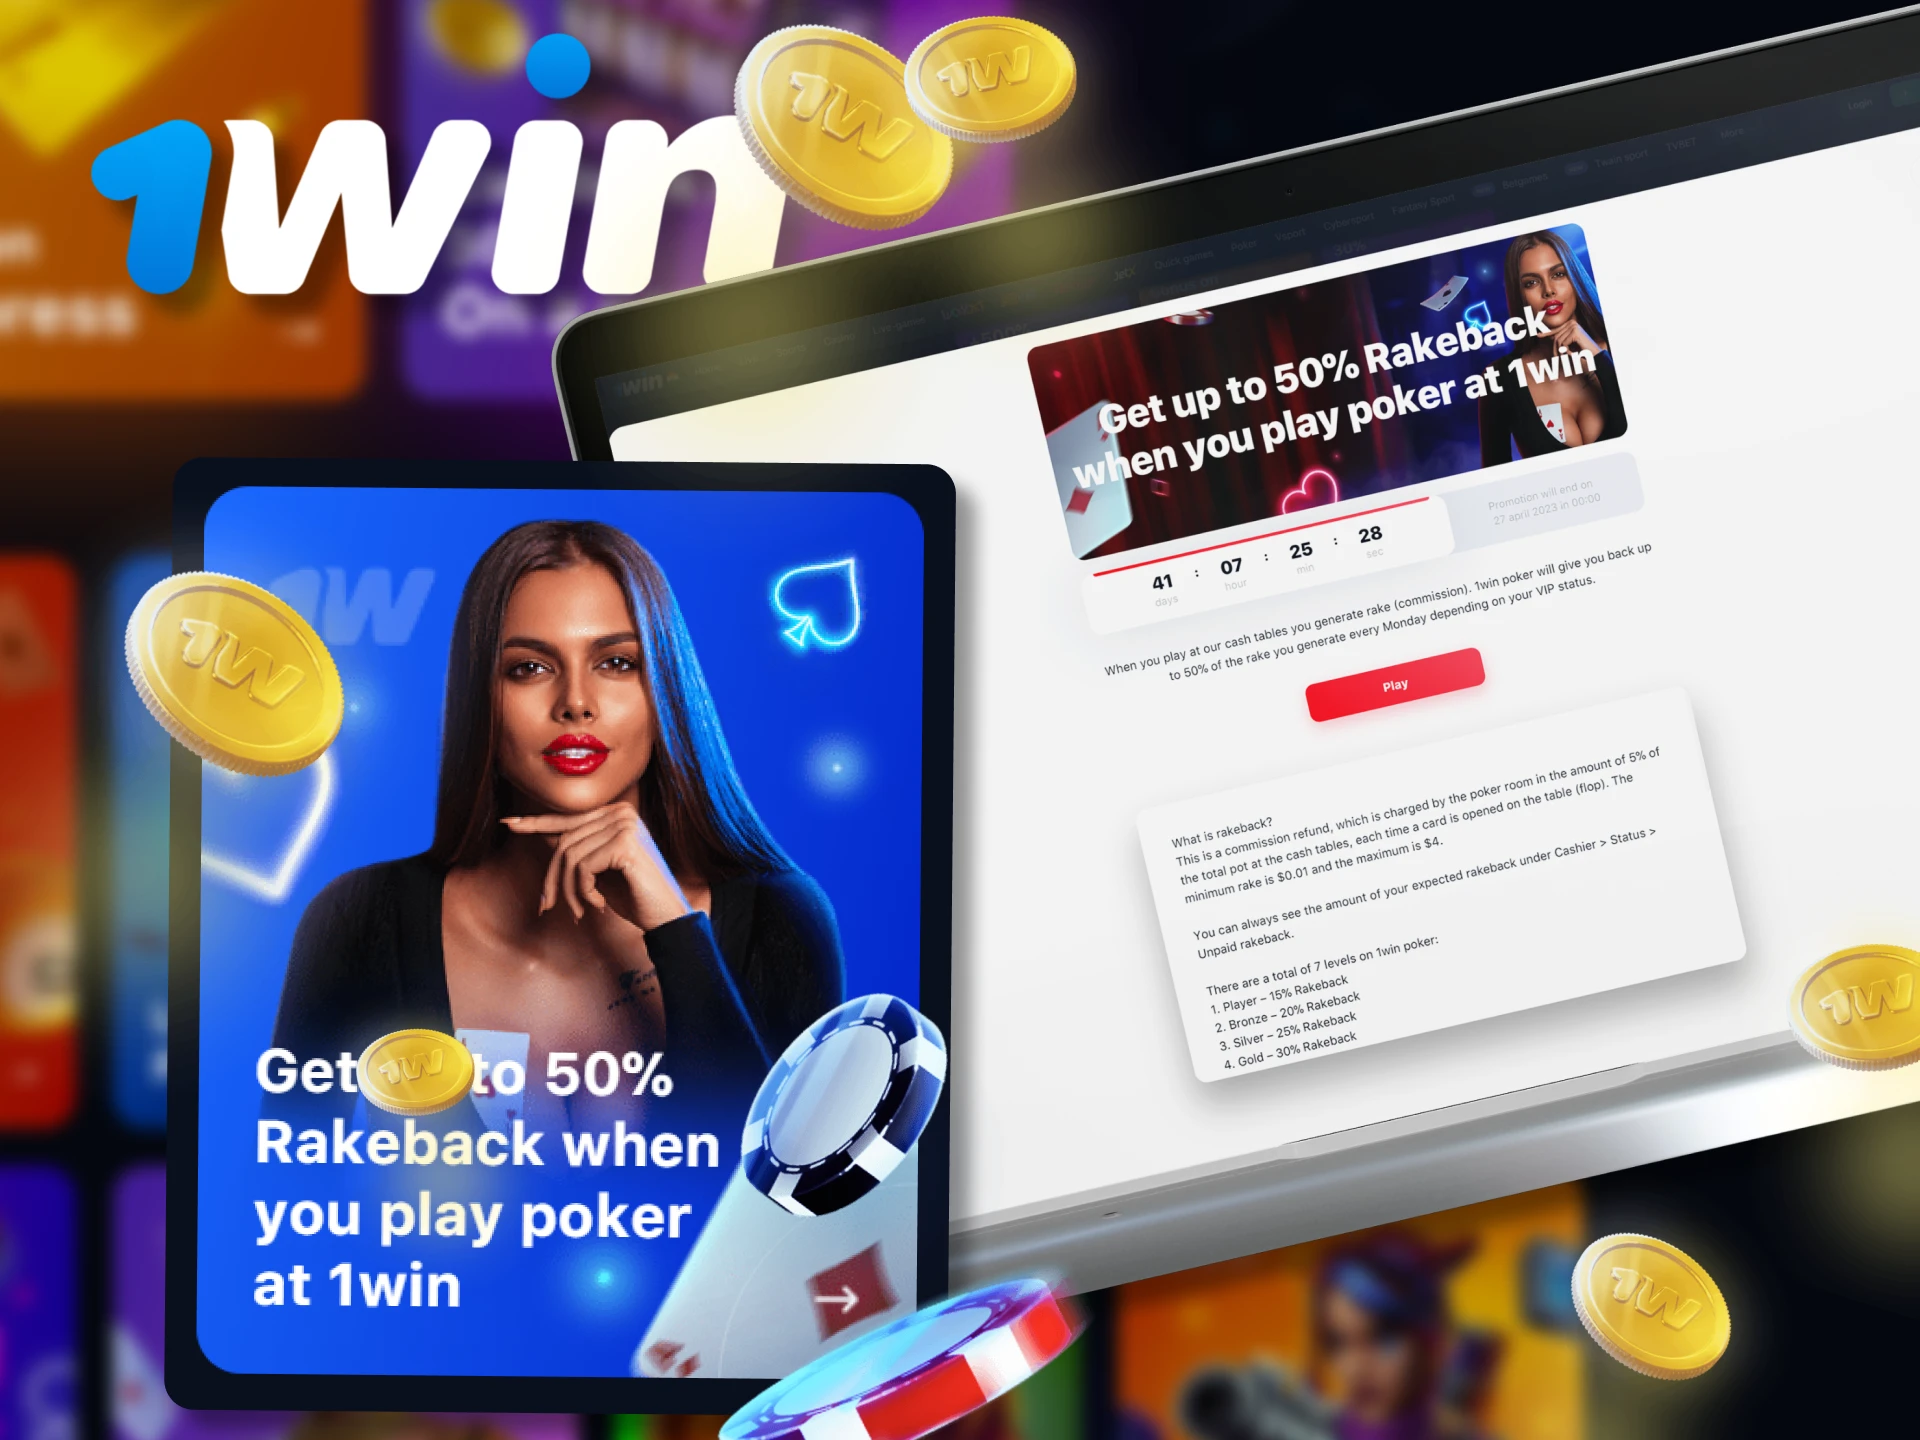 Play poker and get a special 1win bonus of up to 50%.